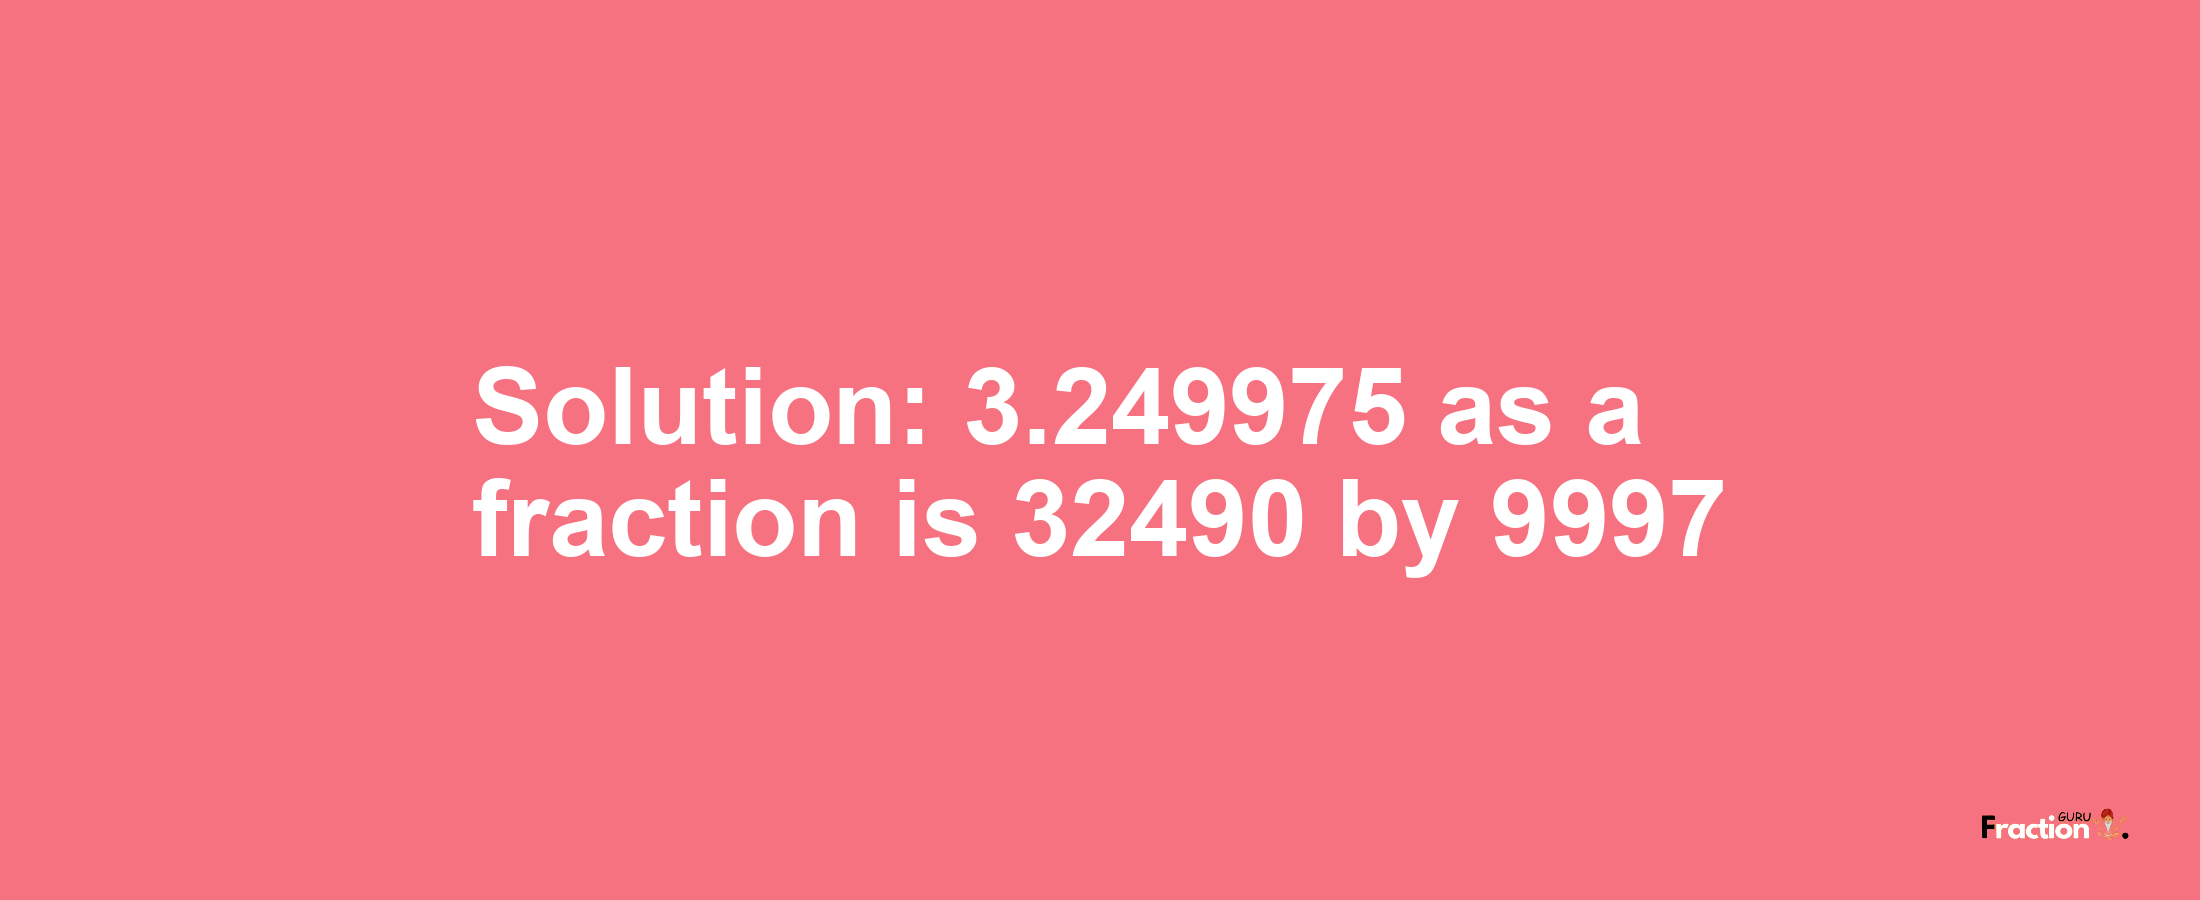 Solution:3.249975 as a fraction is 32490/9997